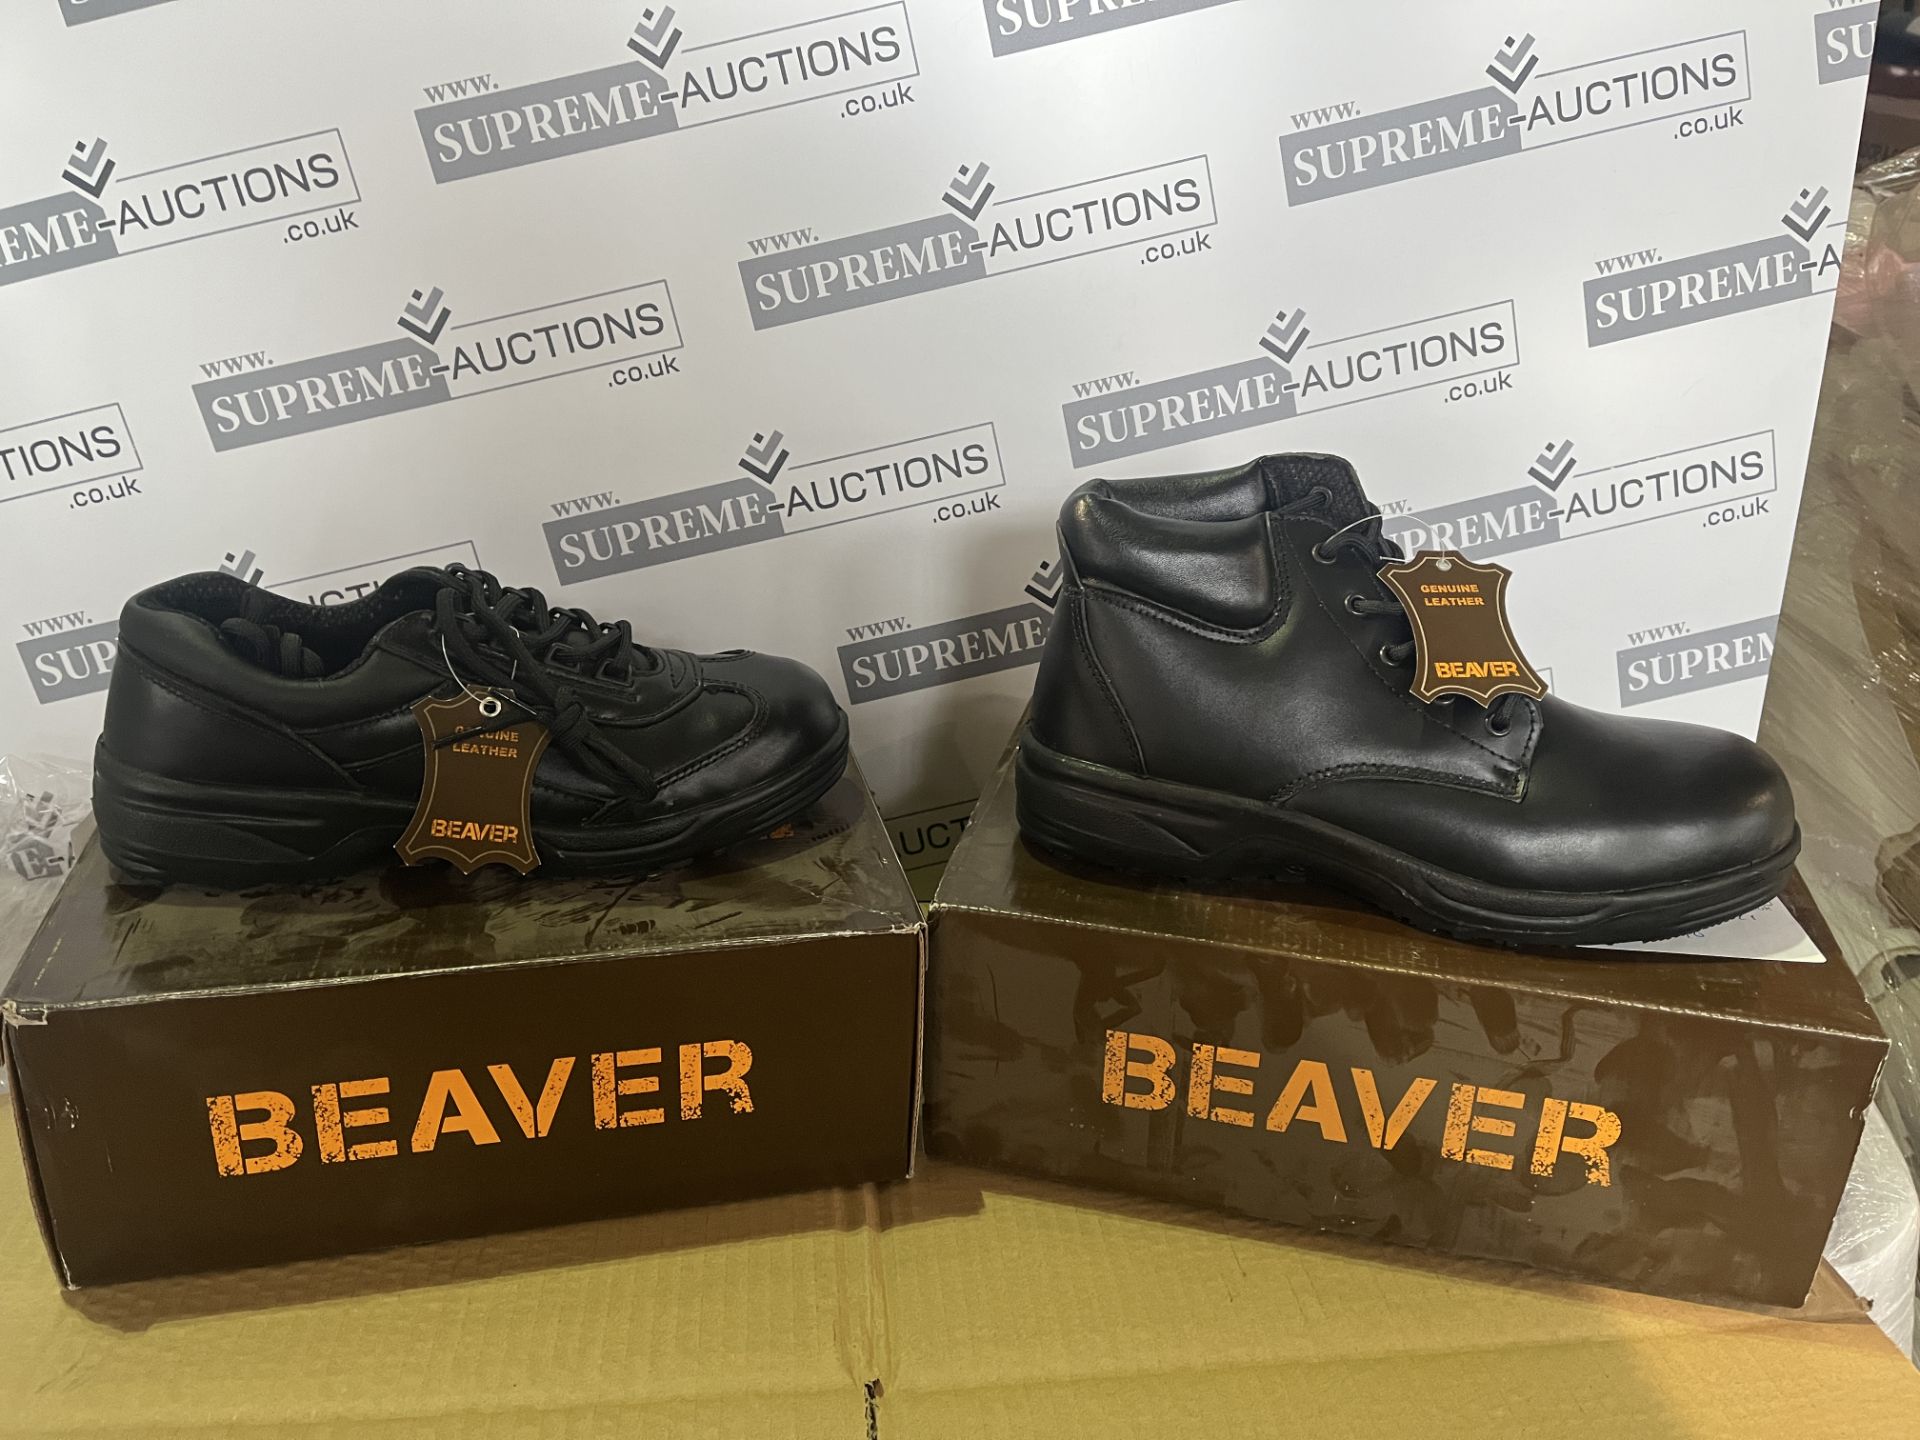 6 X BRAND NEW BEAVER PROFESSIONAL WORK BOOTS IN VARIOUS STYLES AND SIZES R15-8